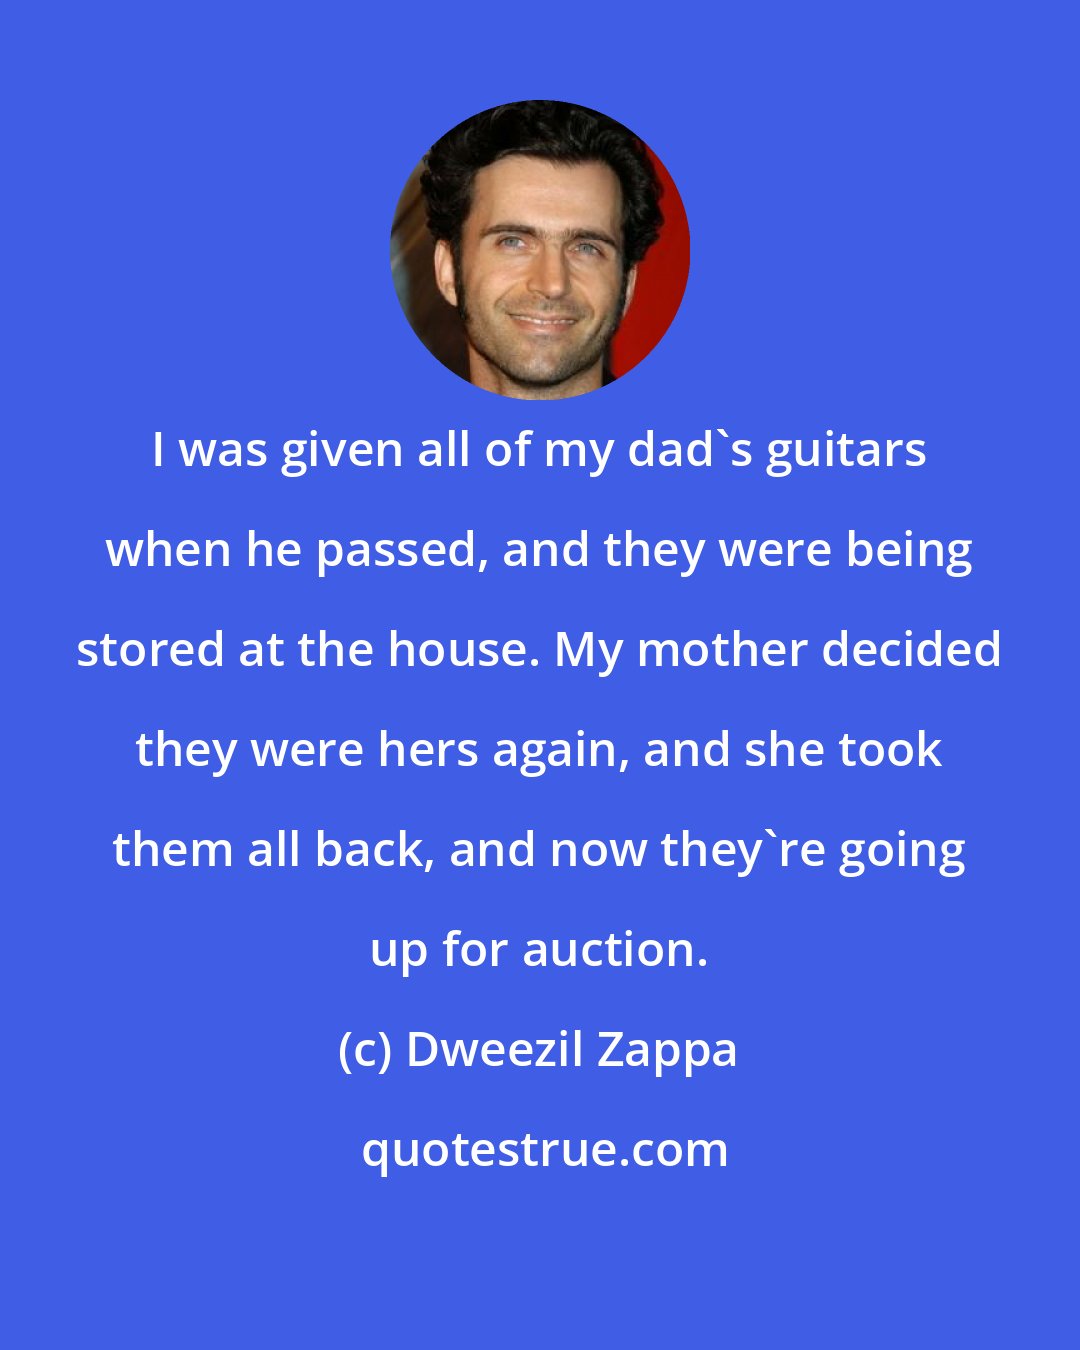 Dweezil Zappa: I was given all of my dad's guitars when he passed, and they were being stored at the house. My mother decided they were hers again, and she took them all back, and now they're going up for auction.